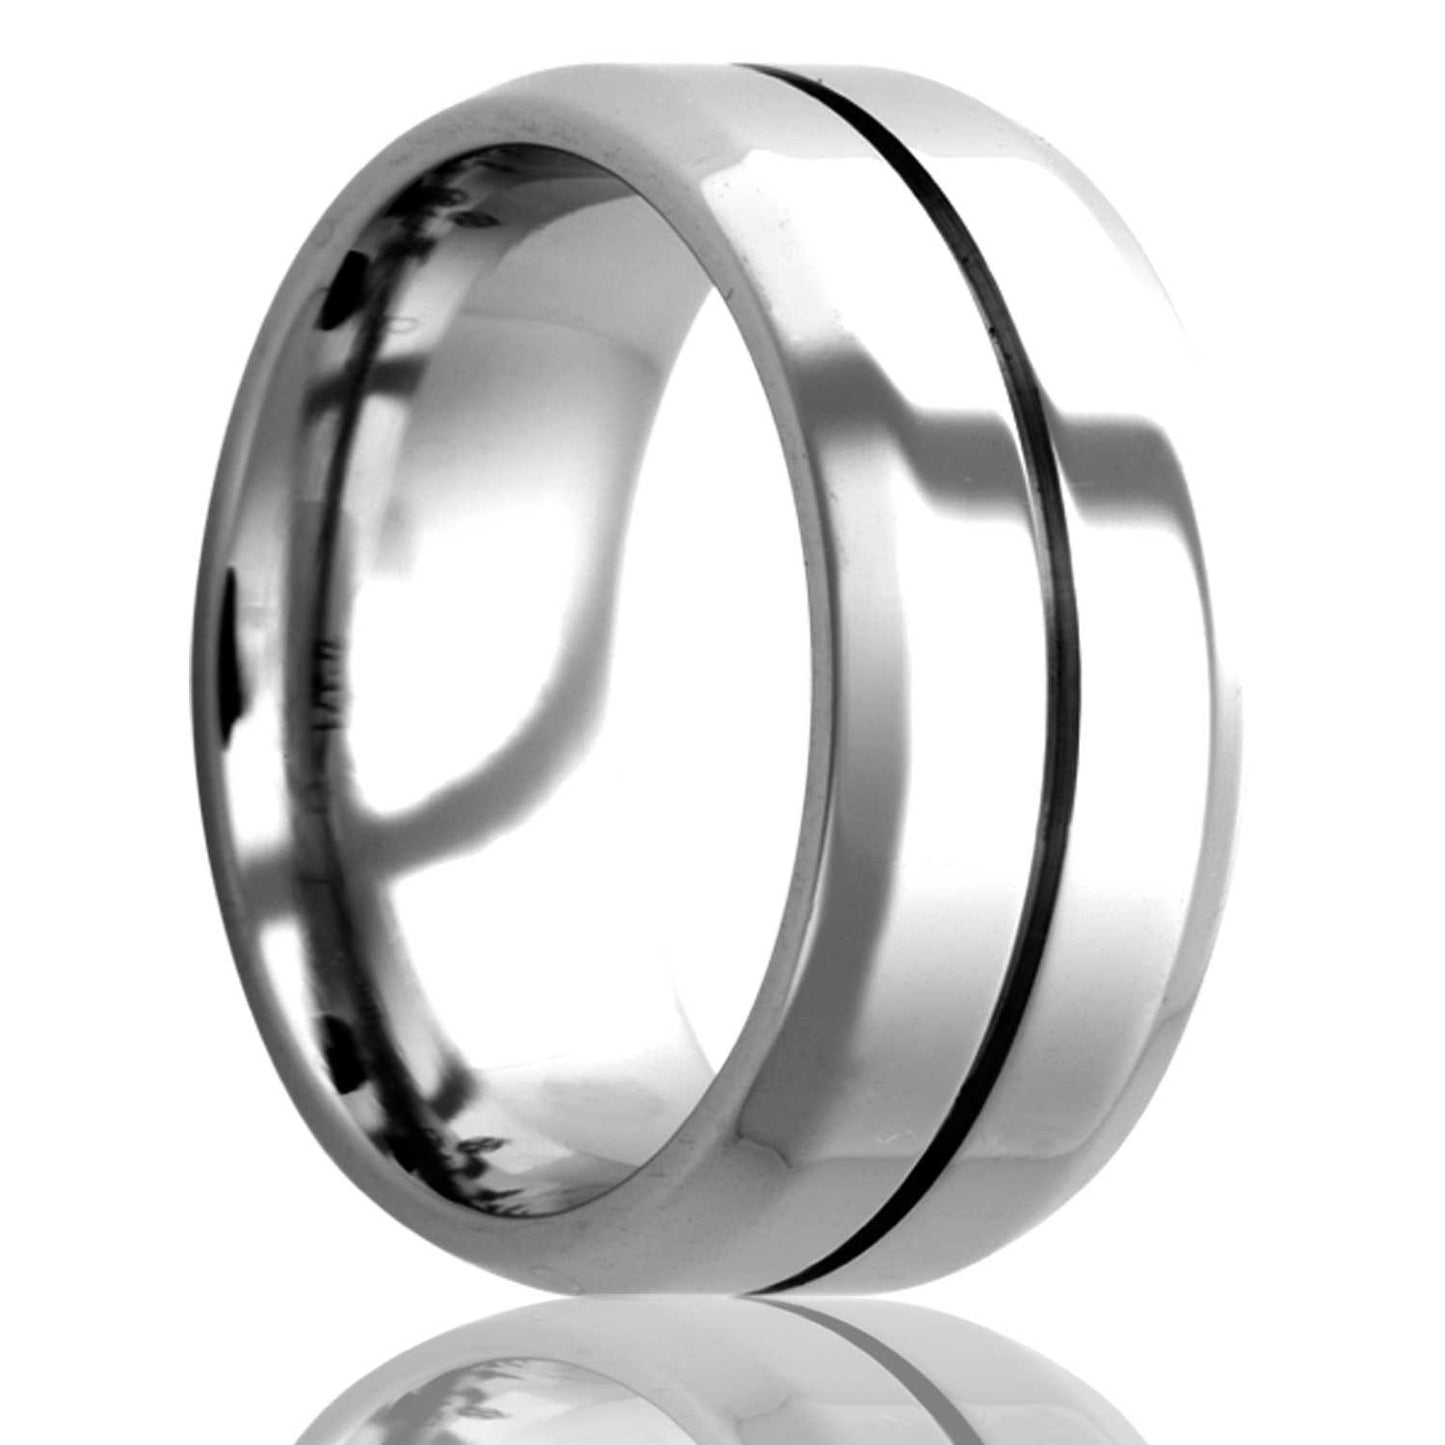 A center groove cobalt wedding band with beveled edges displayed on a neutral white background.